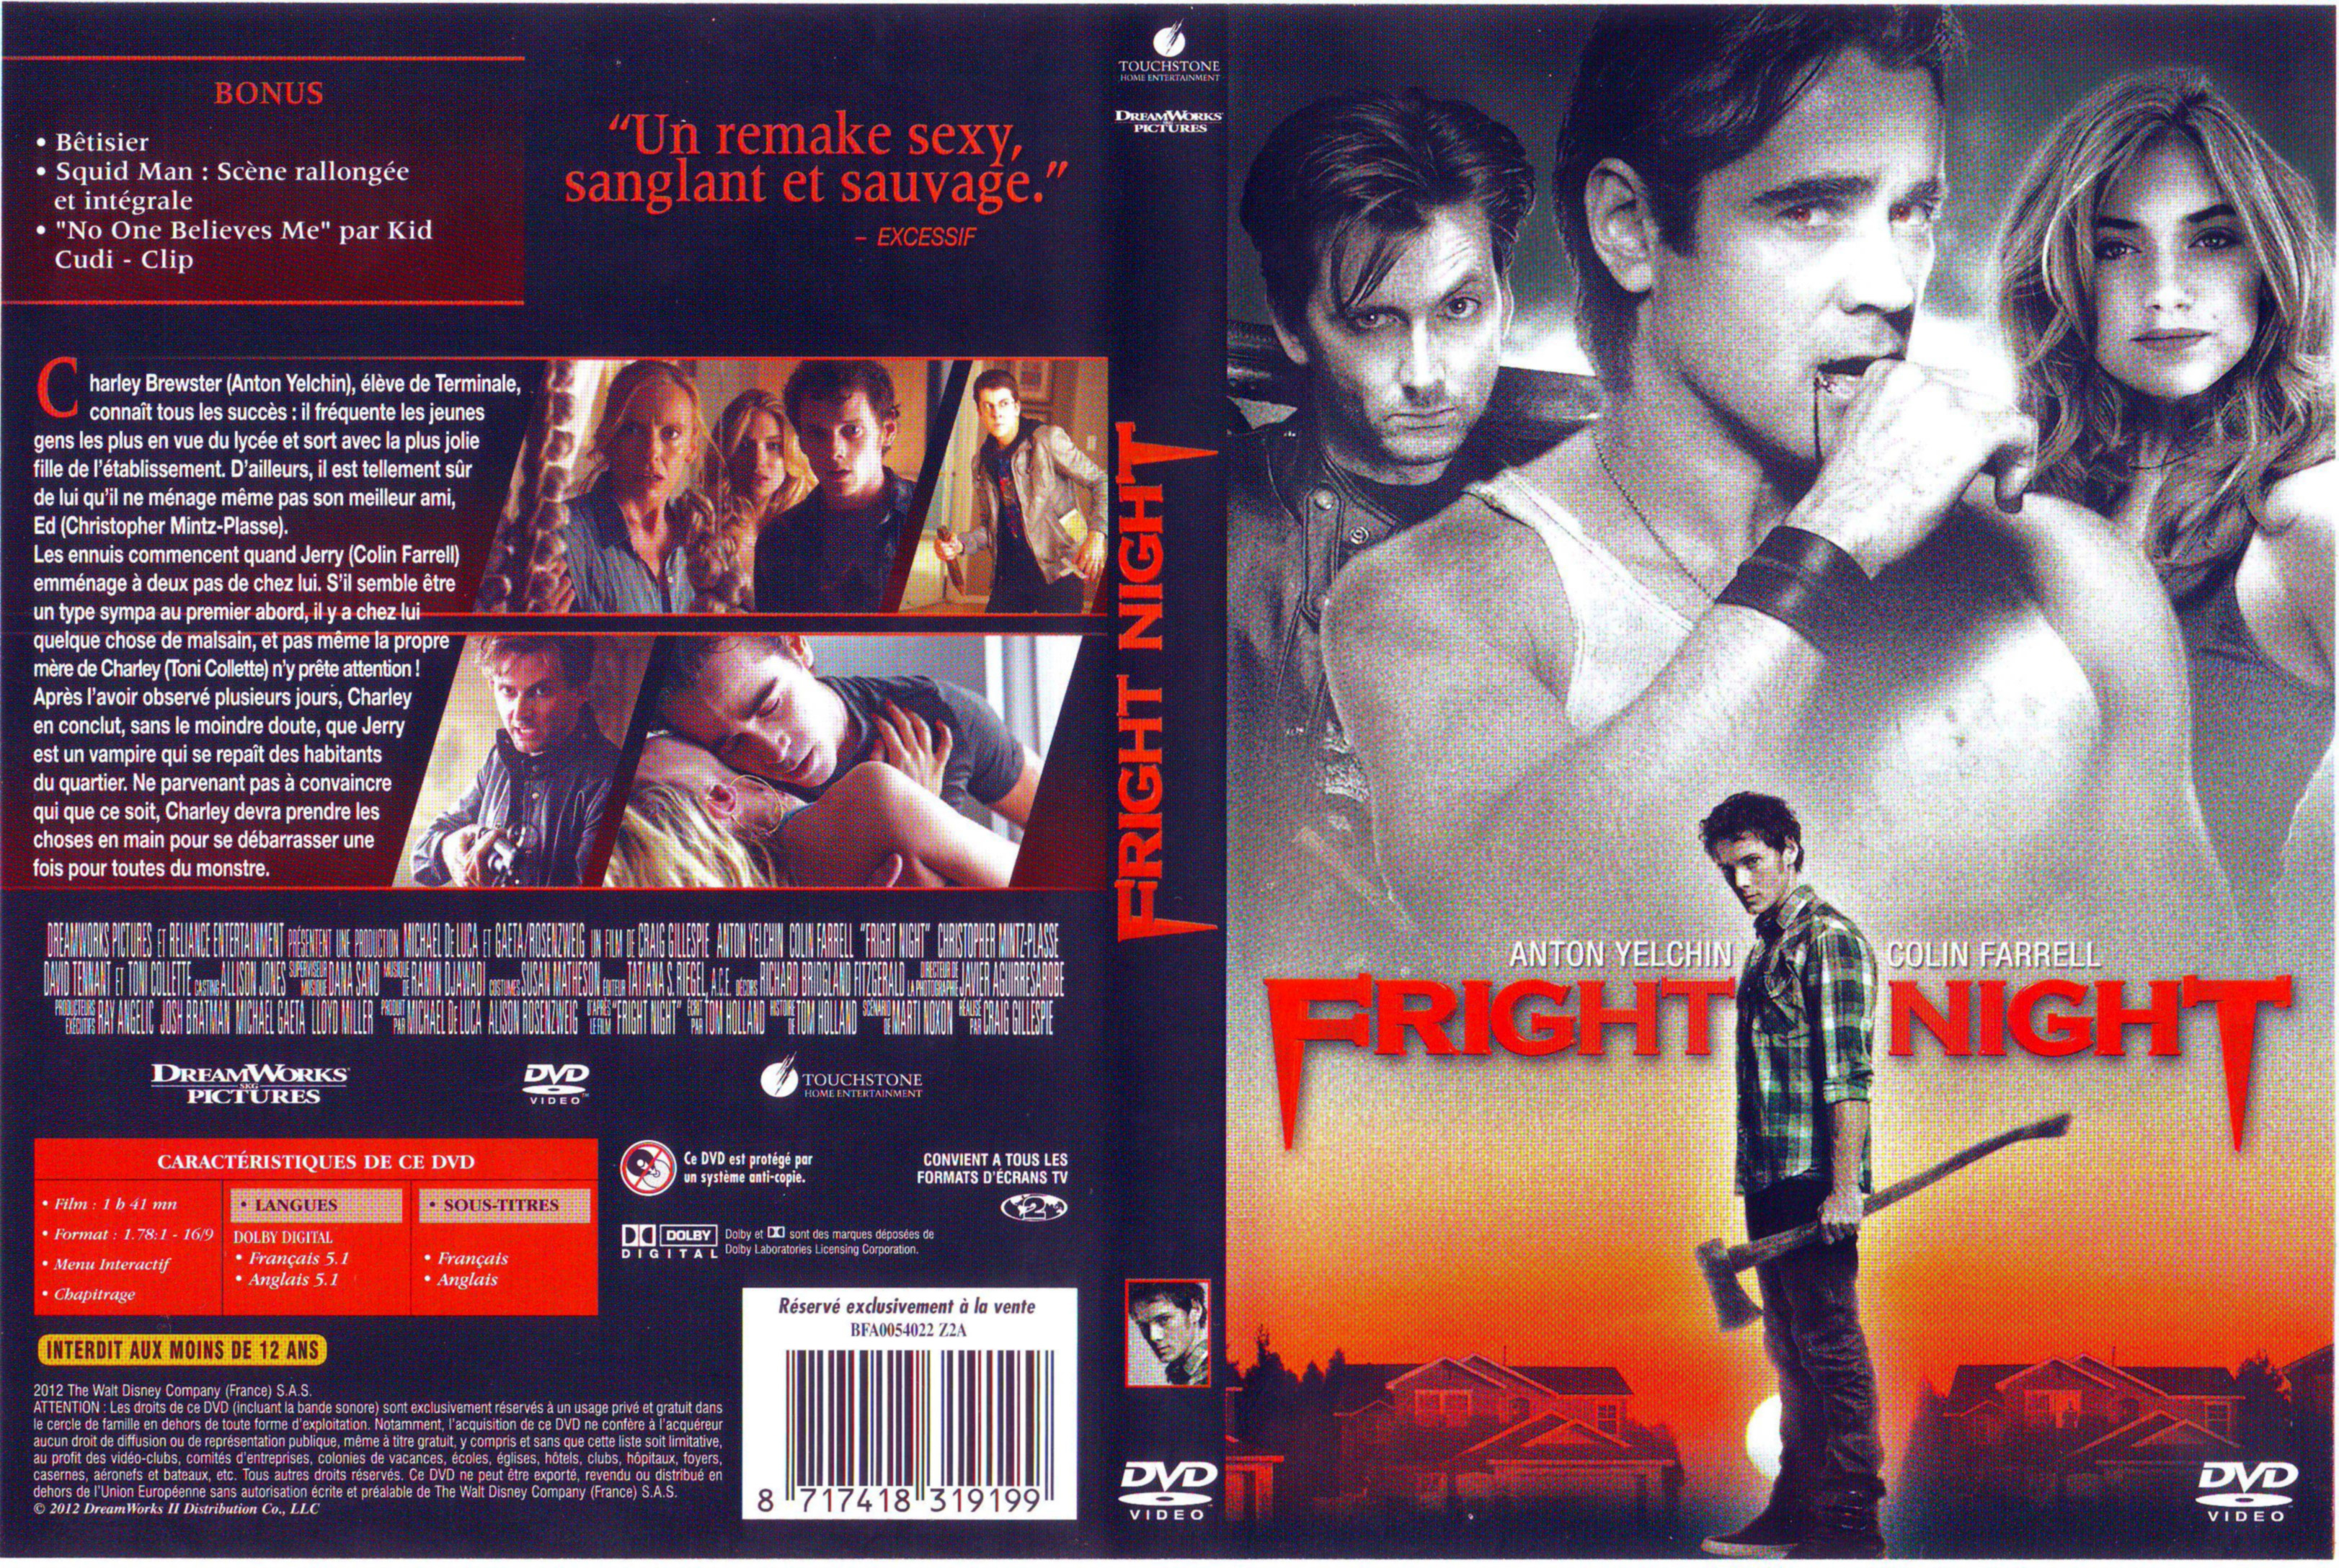 Jaquette DVD Fright night